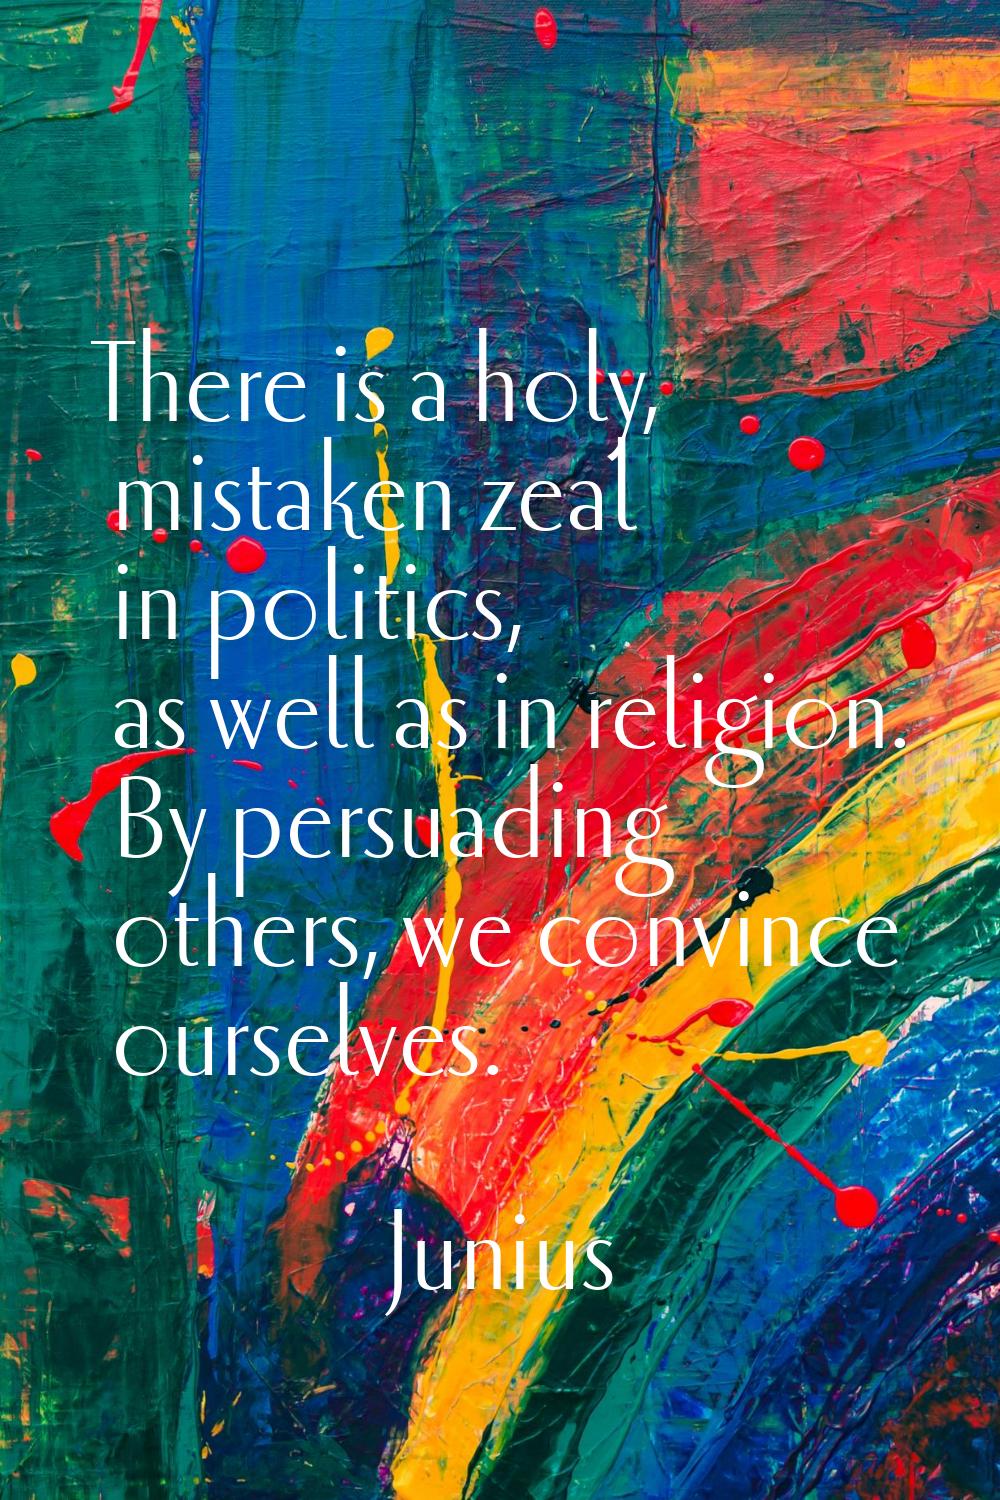 There is a holy, mistaken zeal in politics, as well as in religion. By persuading others, we convin